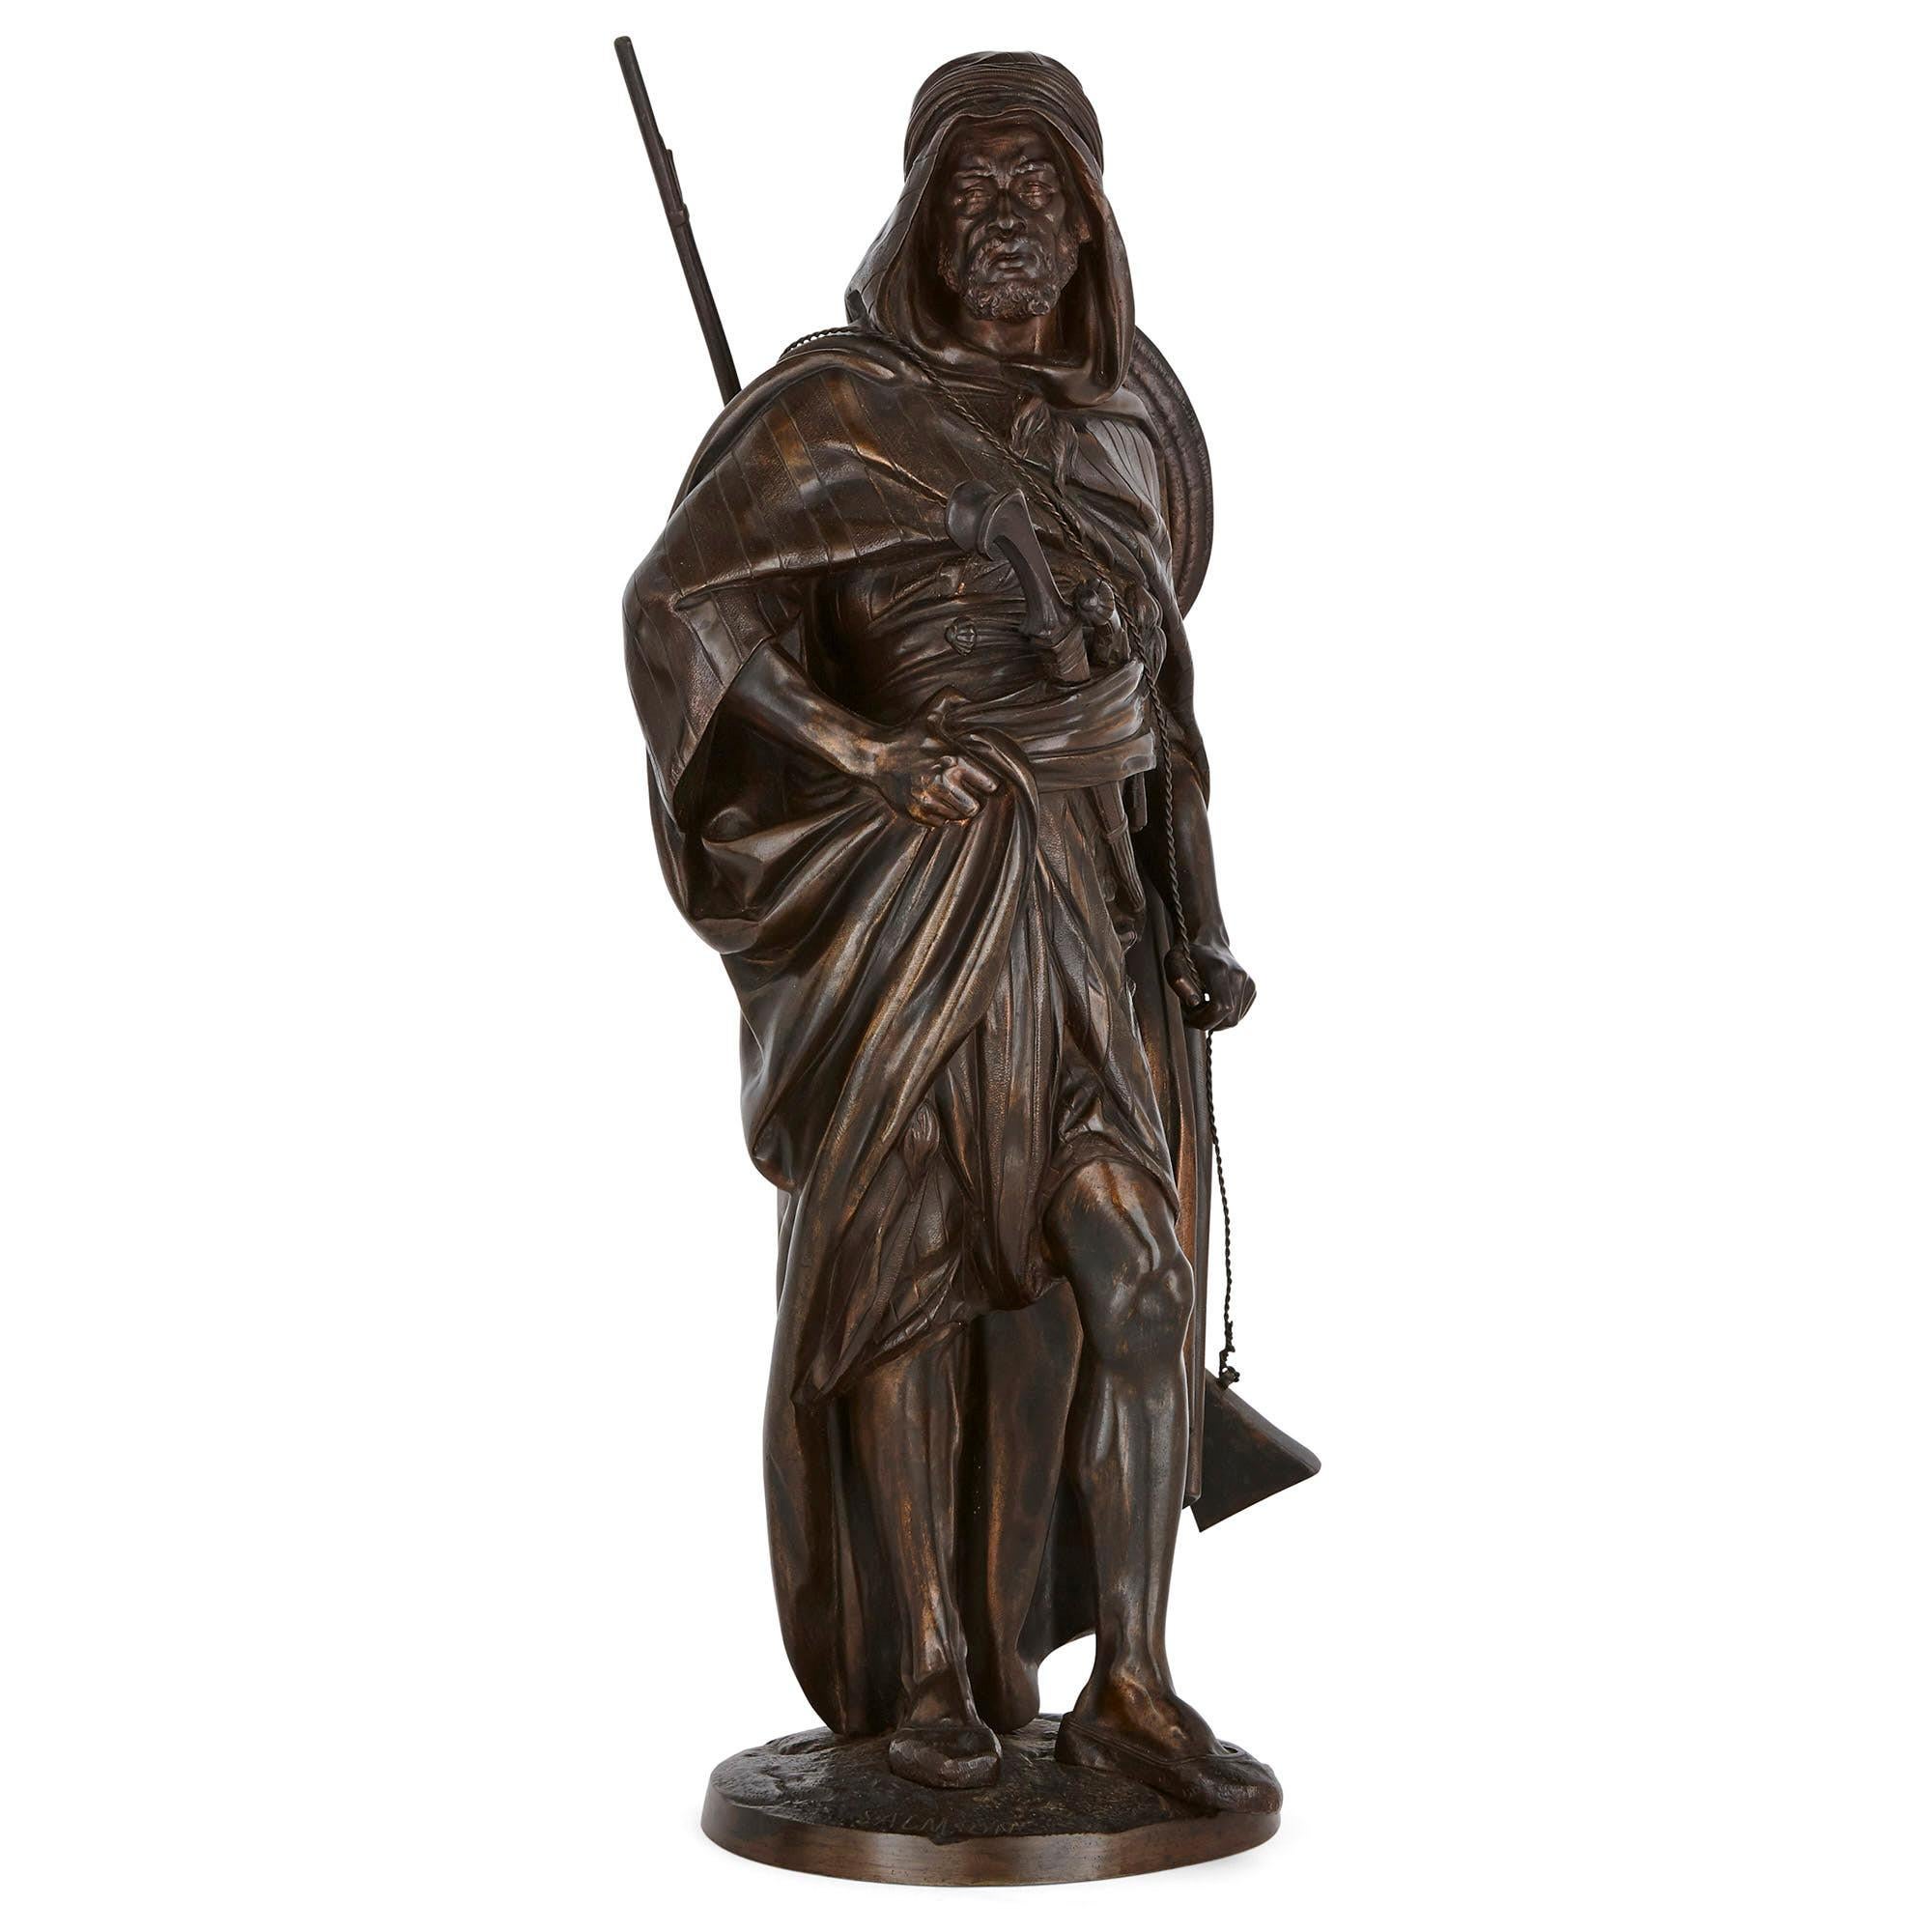 This pair of sculptures by Jean Jules Salmson, made of patinated bronze, depicts a male Arab warrior (‘Le Guerrier Arabe’) and a female water carrier (‘La Porteuse’). The male figure presents a dominant posture, his right elbow extending strongly